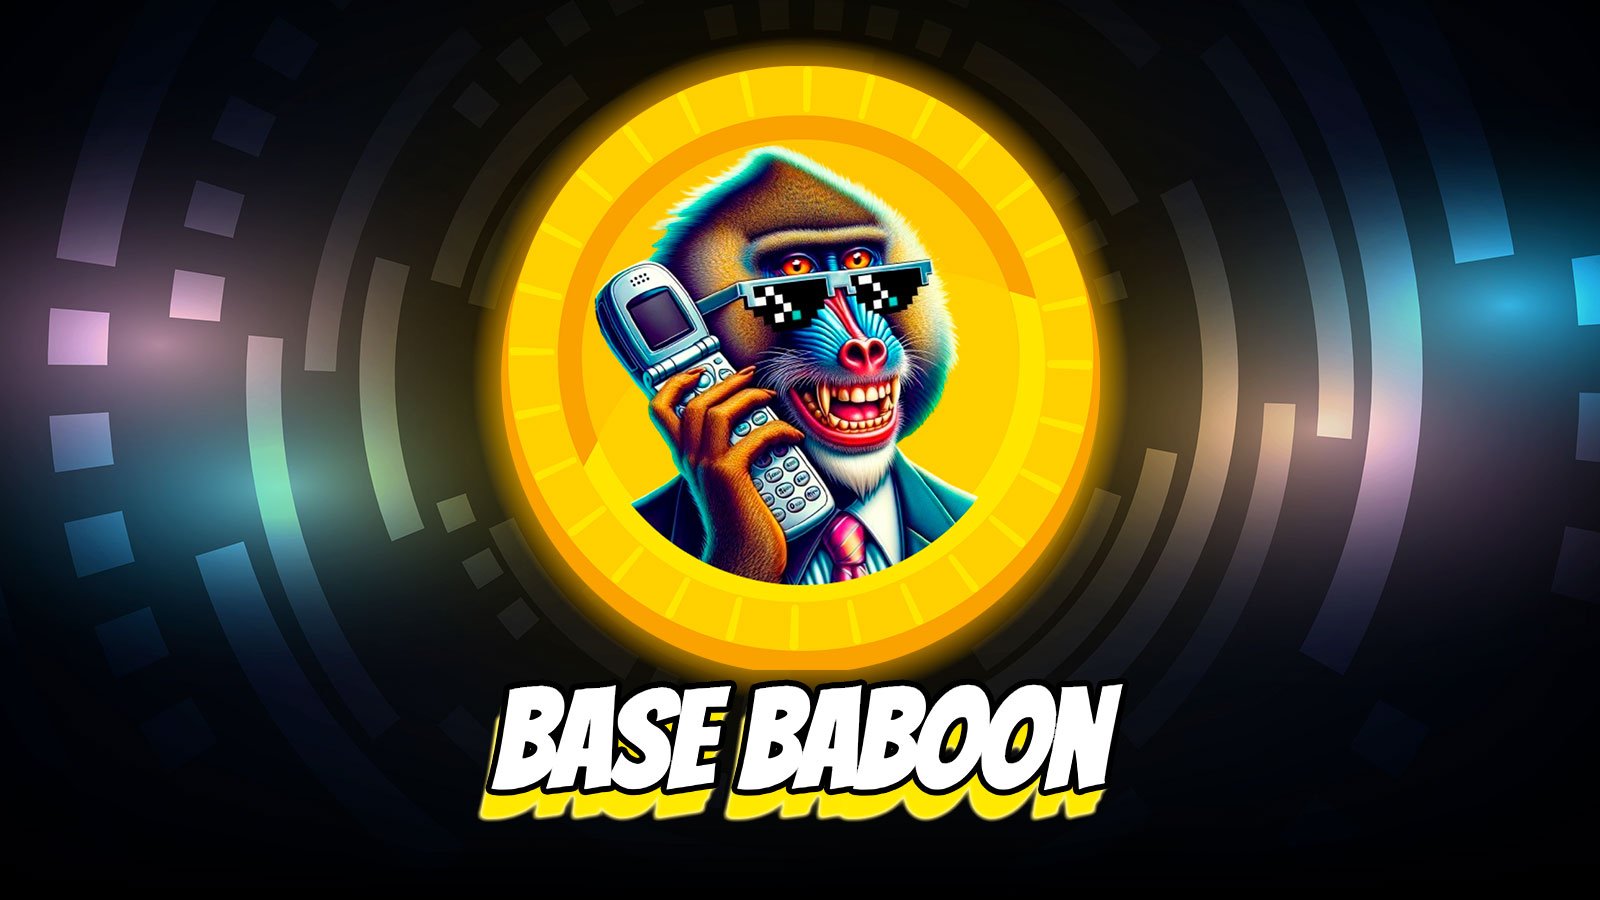 New Meme Coin Base Baboon $BOON Launches on BASE Network Ethereum Layer 2